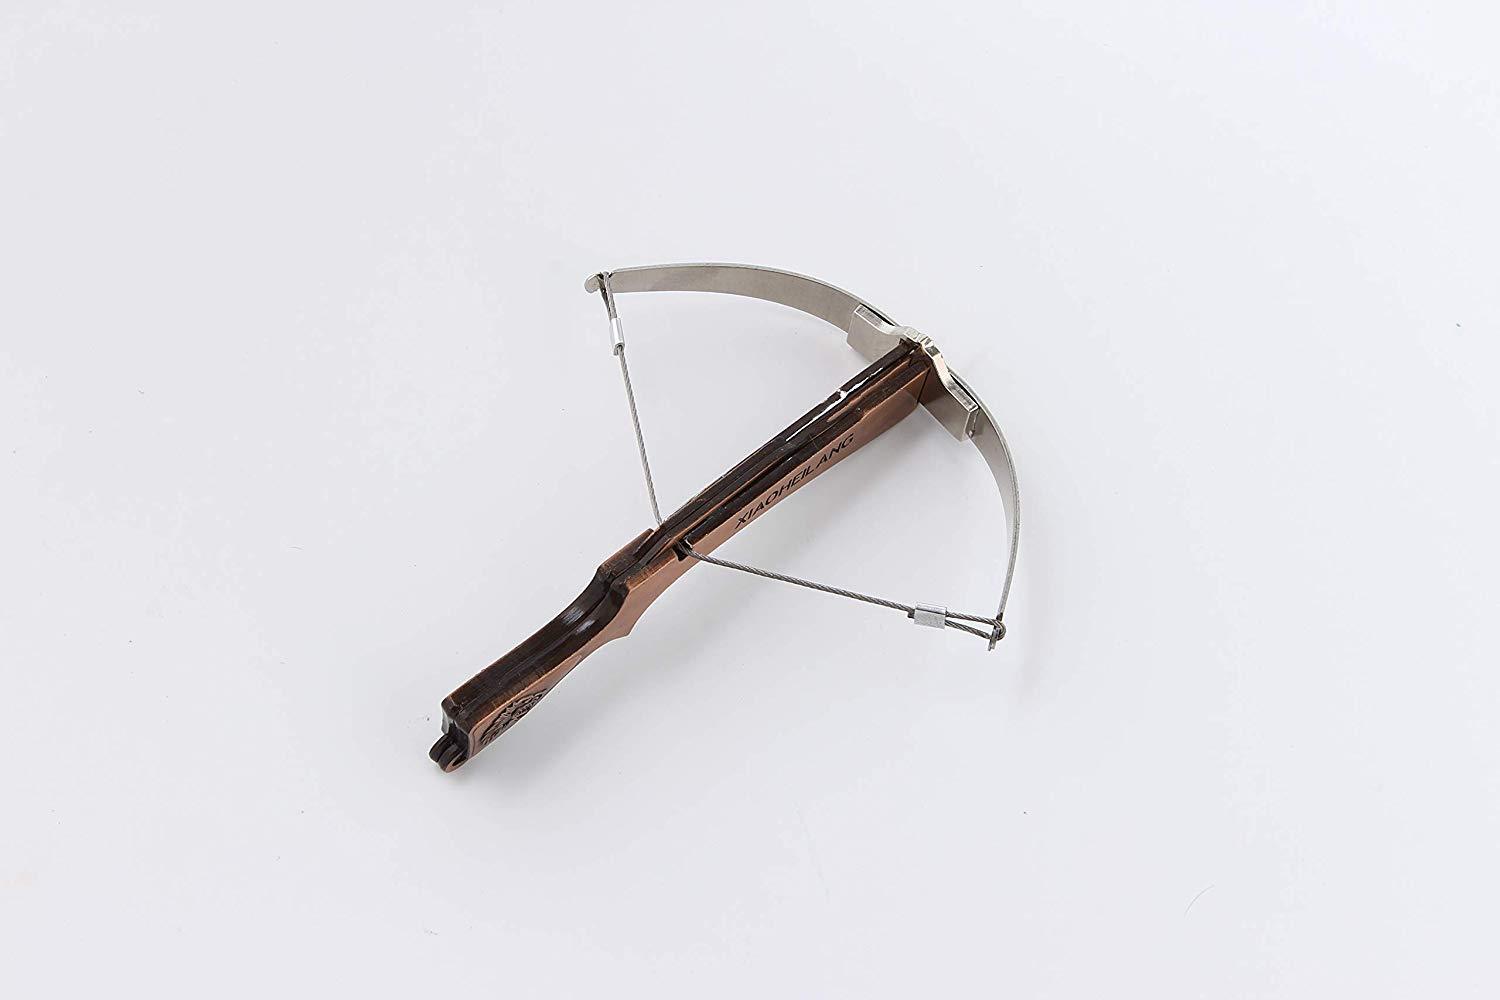 Bronze Mini Crossbow Newly Designed Metal Toy Cross and Bow